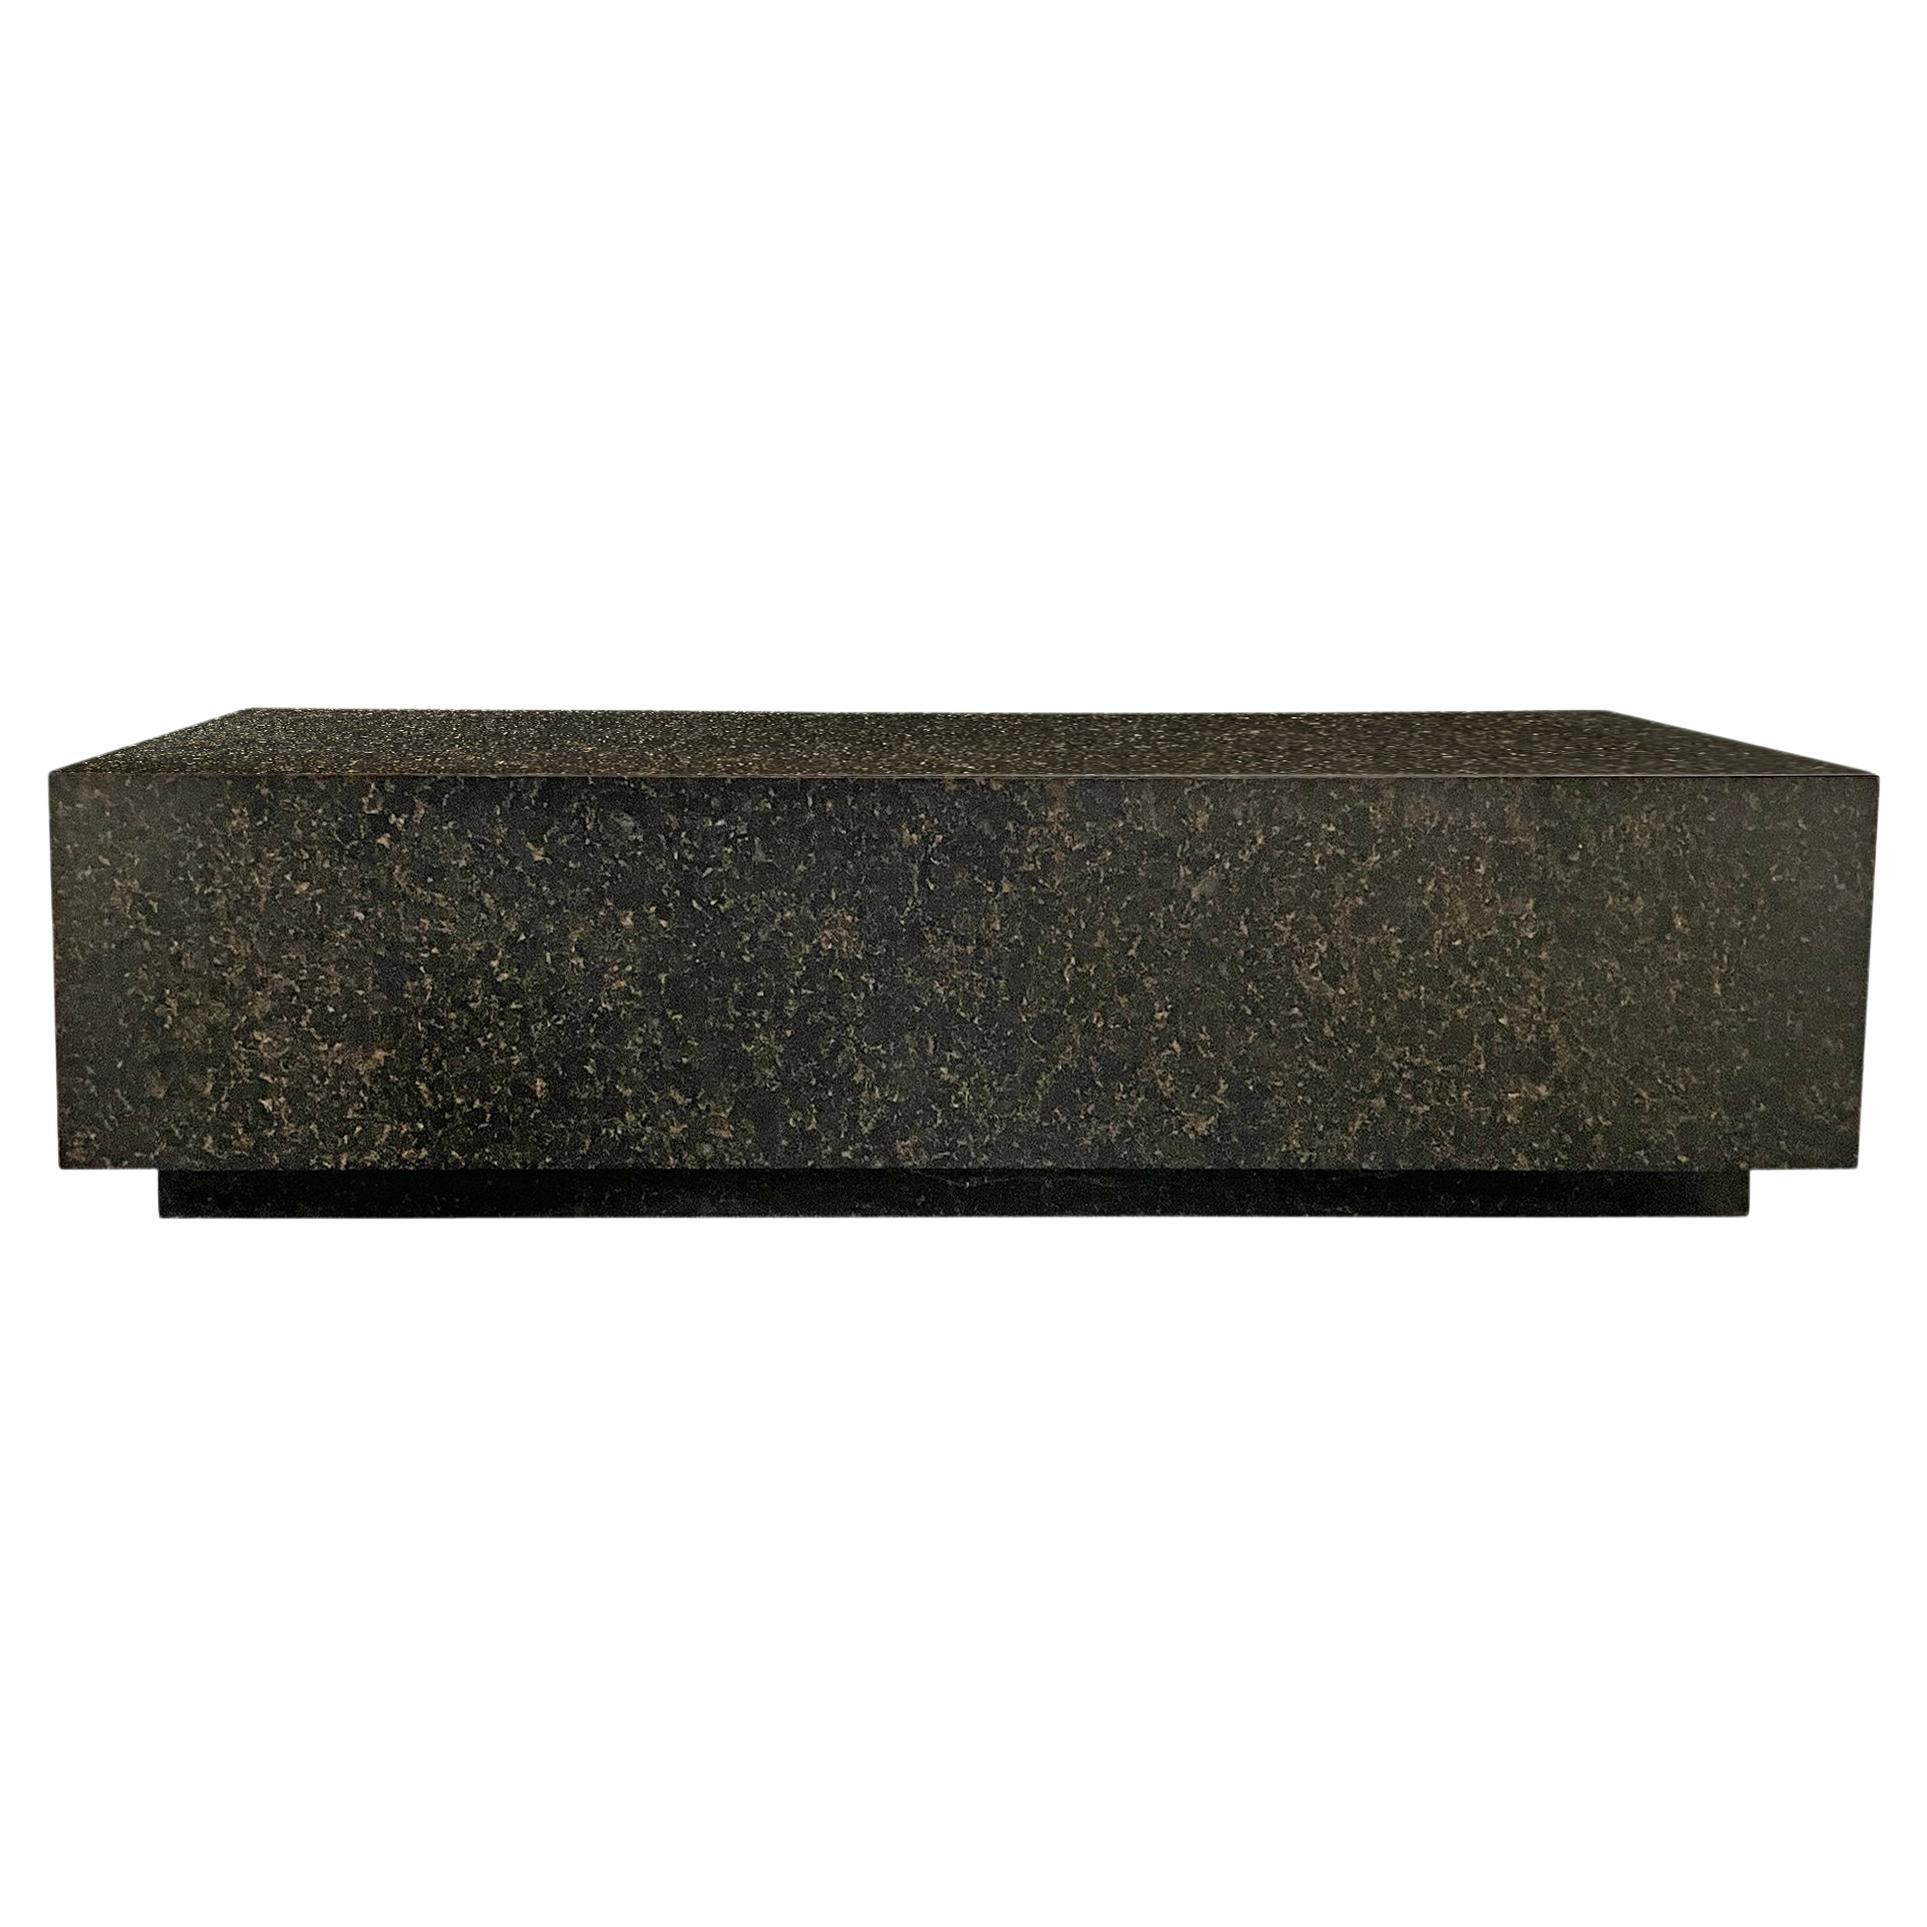 Modernist Solid Granite Table or Bench